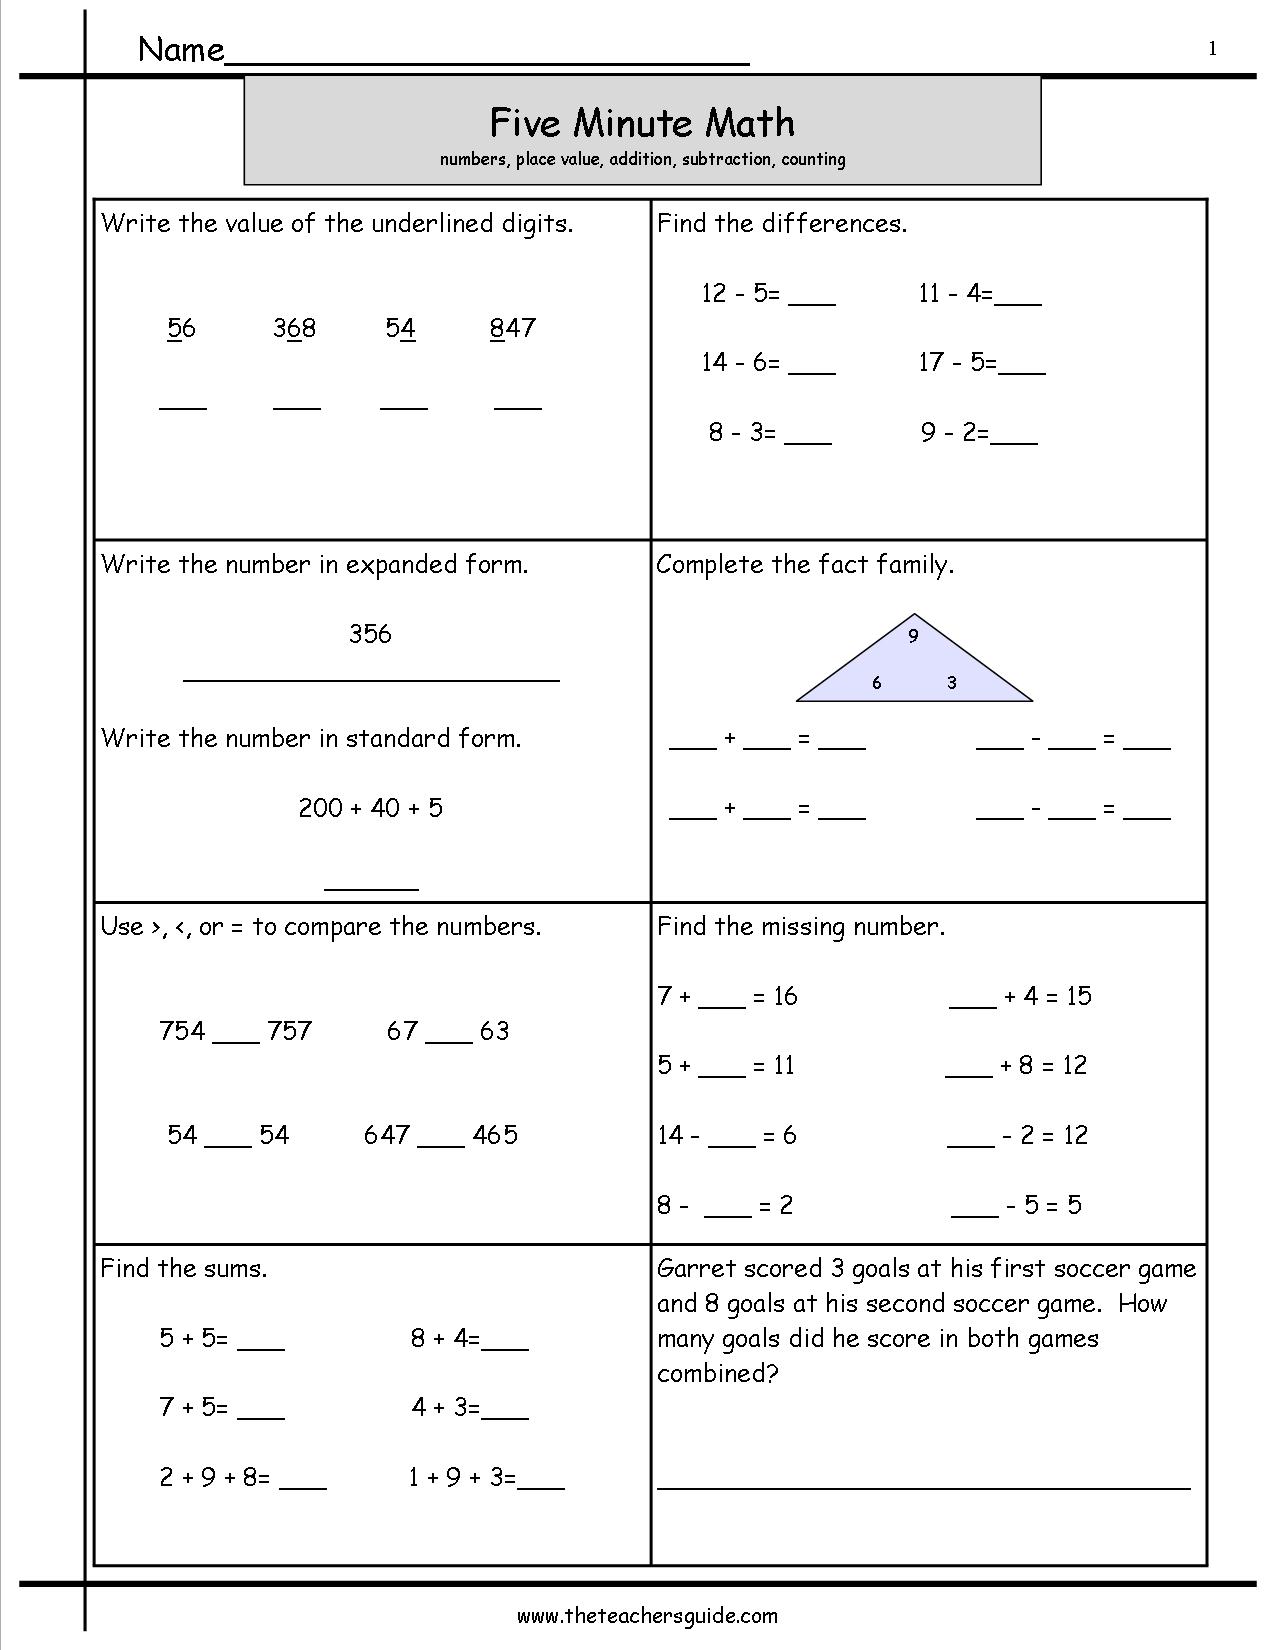 8-best-images-of-kumon-math-worksheets-printable-free-printable-kumon-math-worksheets-triple